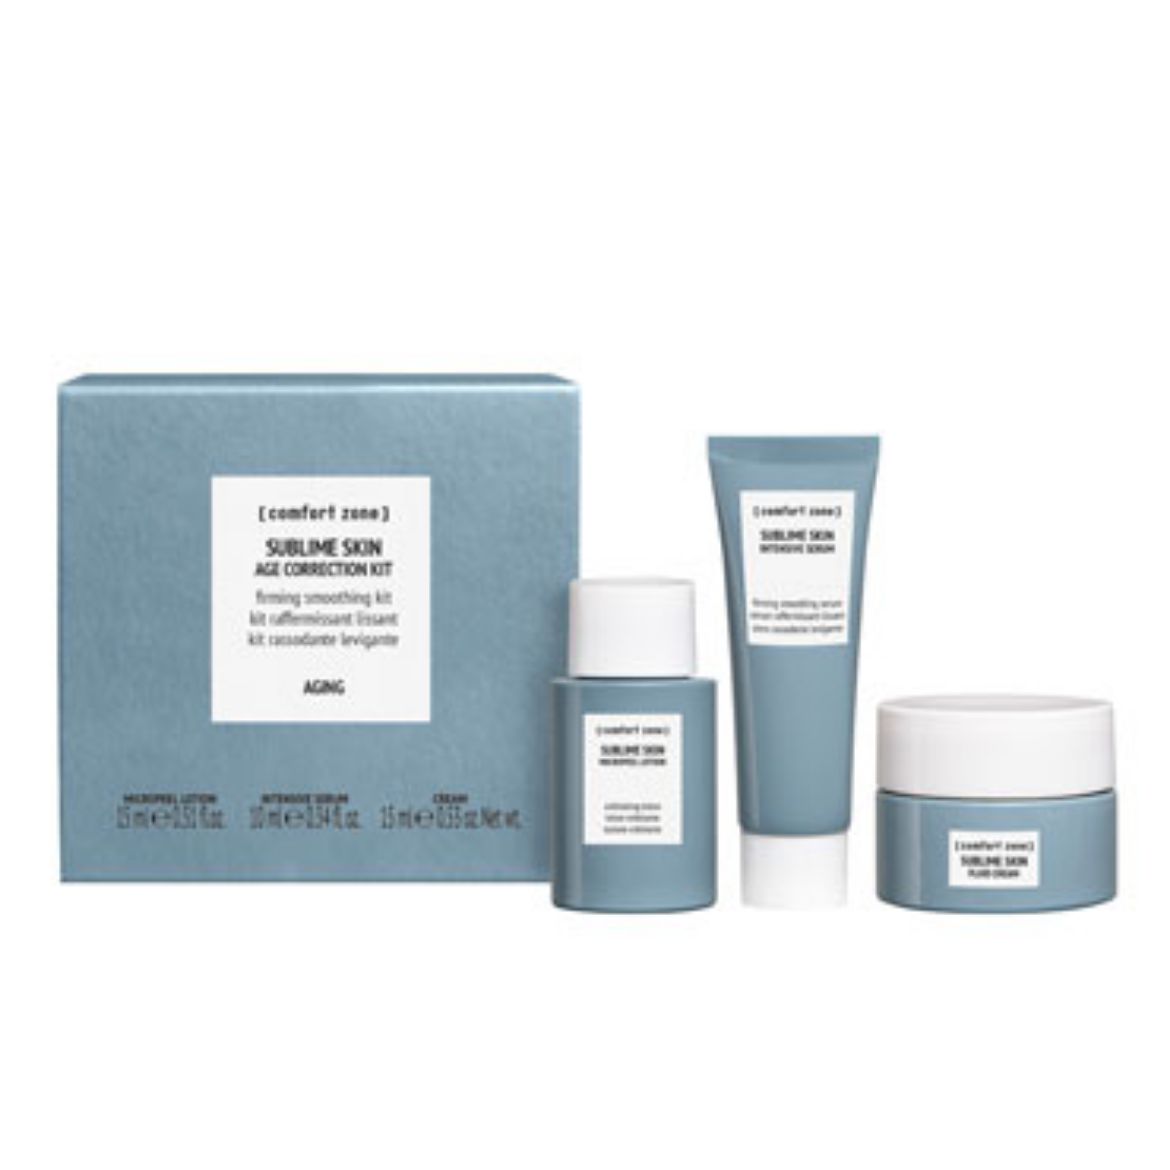 Image of Comfort Zone Sublime Skin Discovery Kit